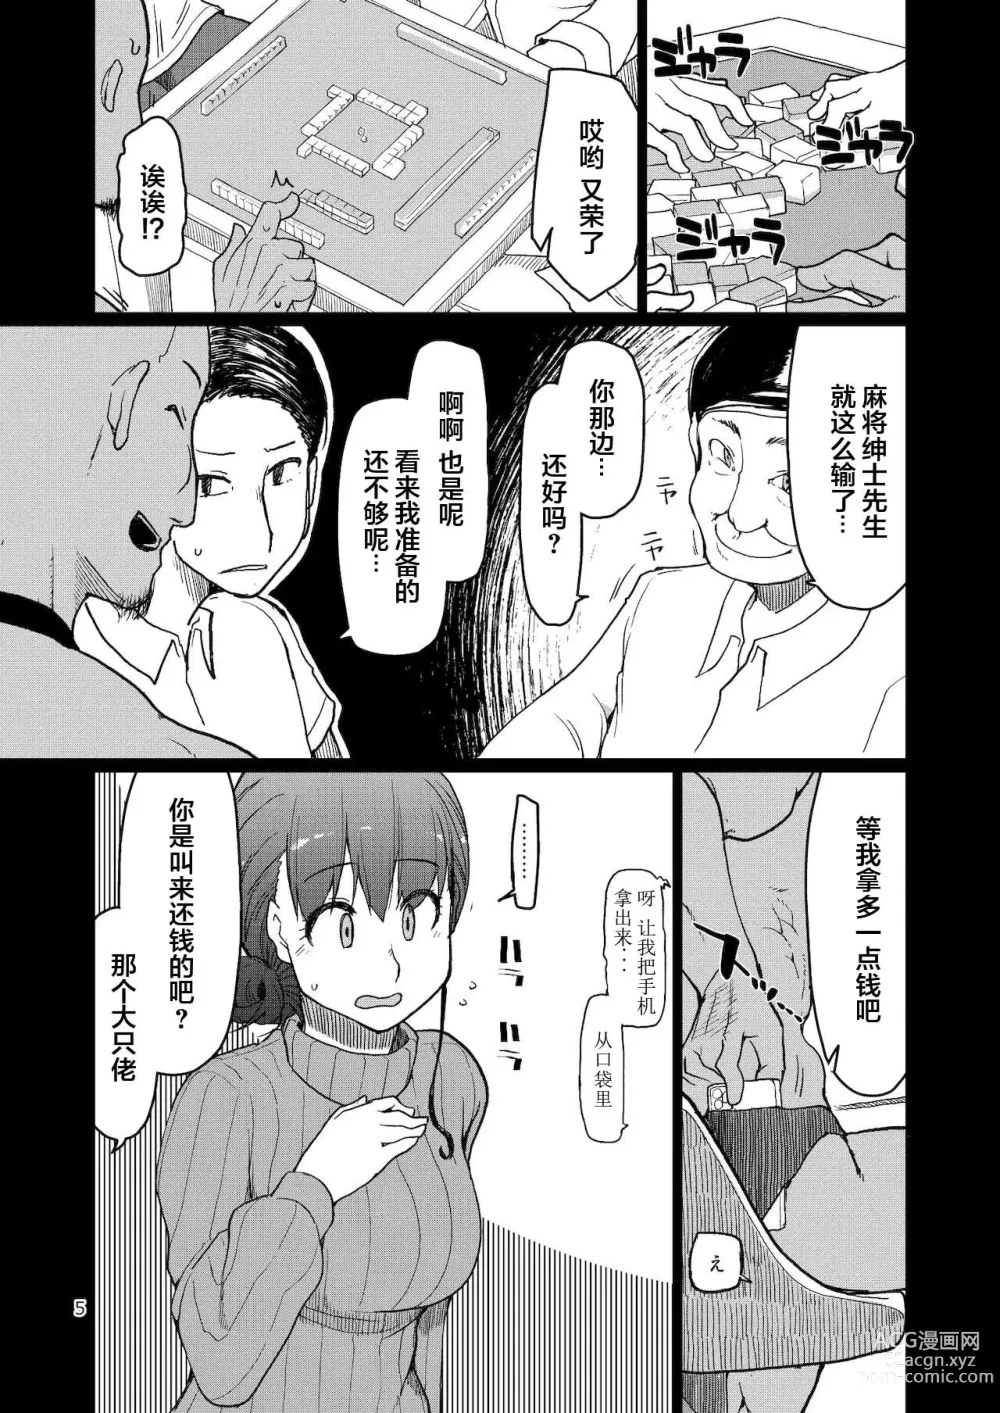 Page 6 of doujinshi SYG -Sell your girlfriend-2